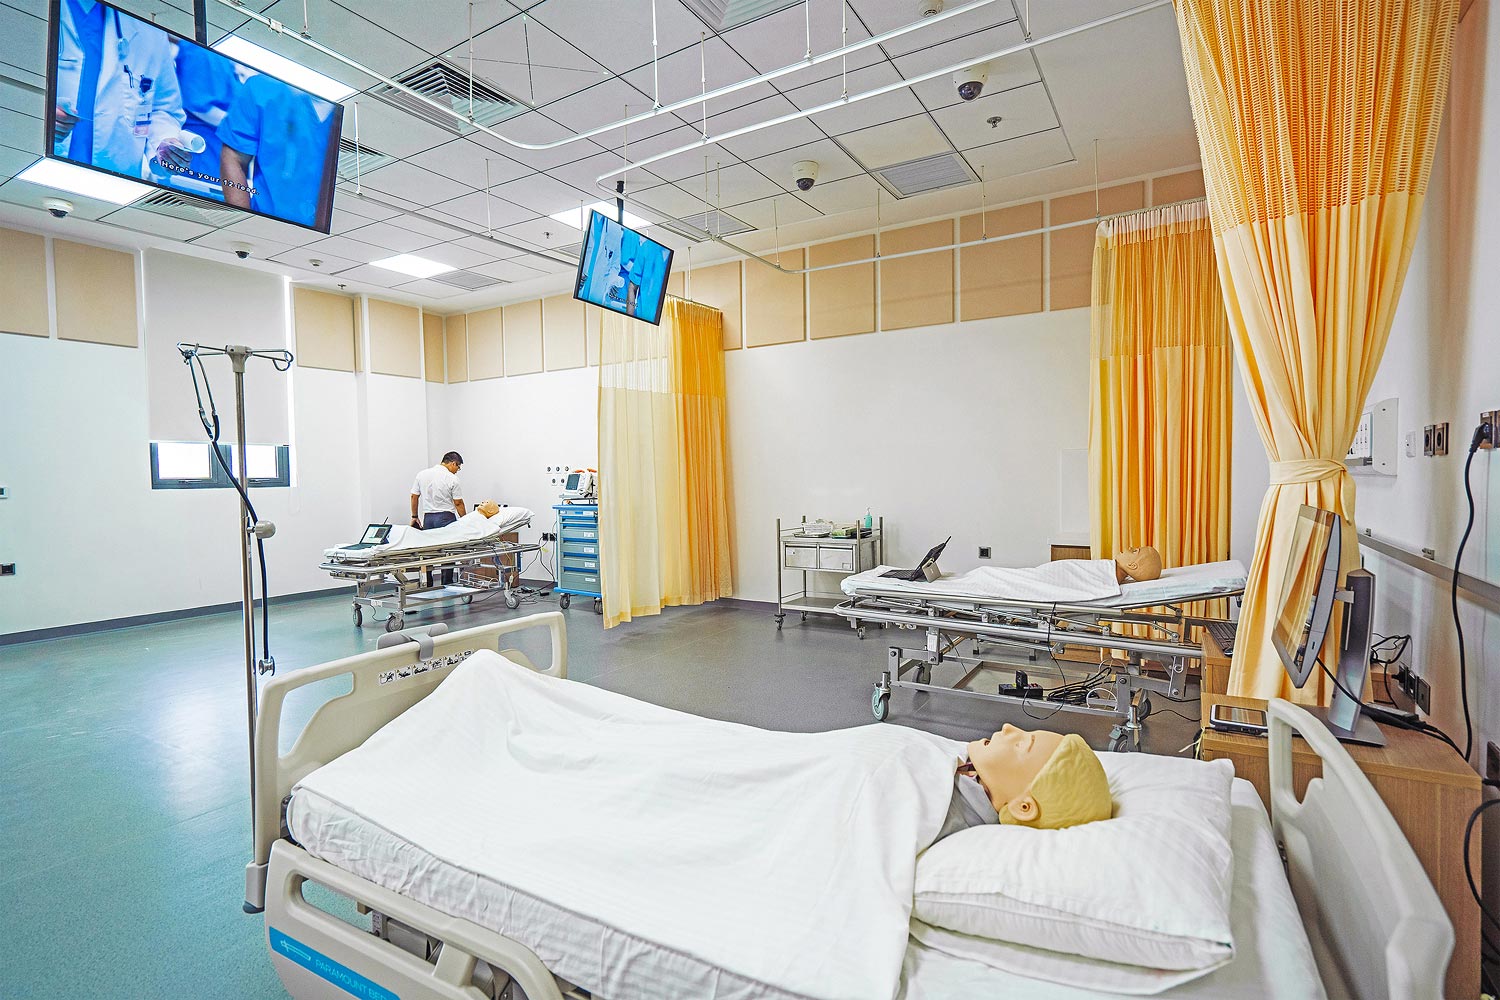 VinUniversity's medical training facilities provide a wide variety of rooms, treatment bays, and emergency response settings that mimic real-world scenarios.